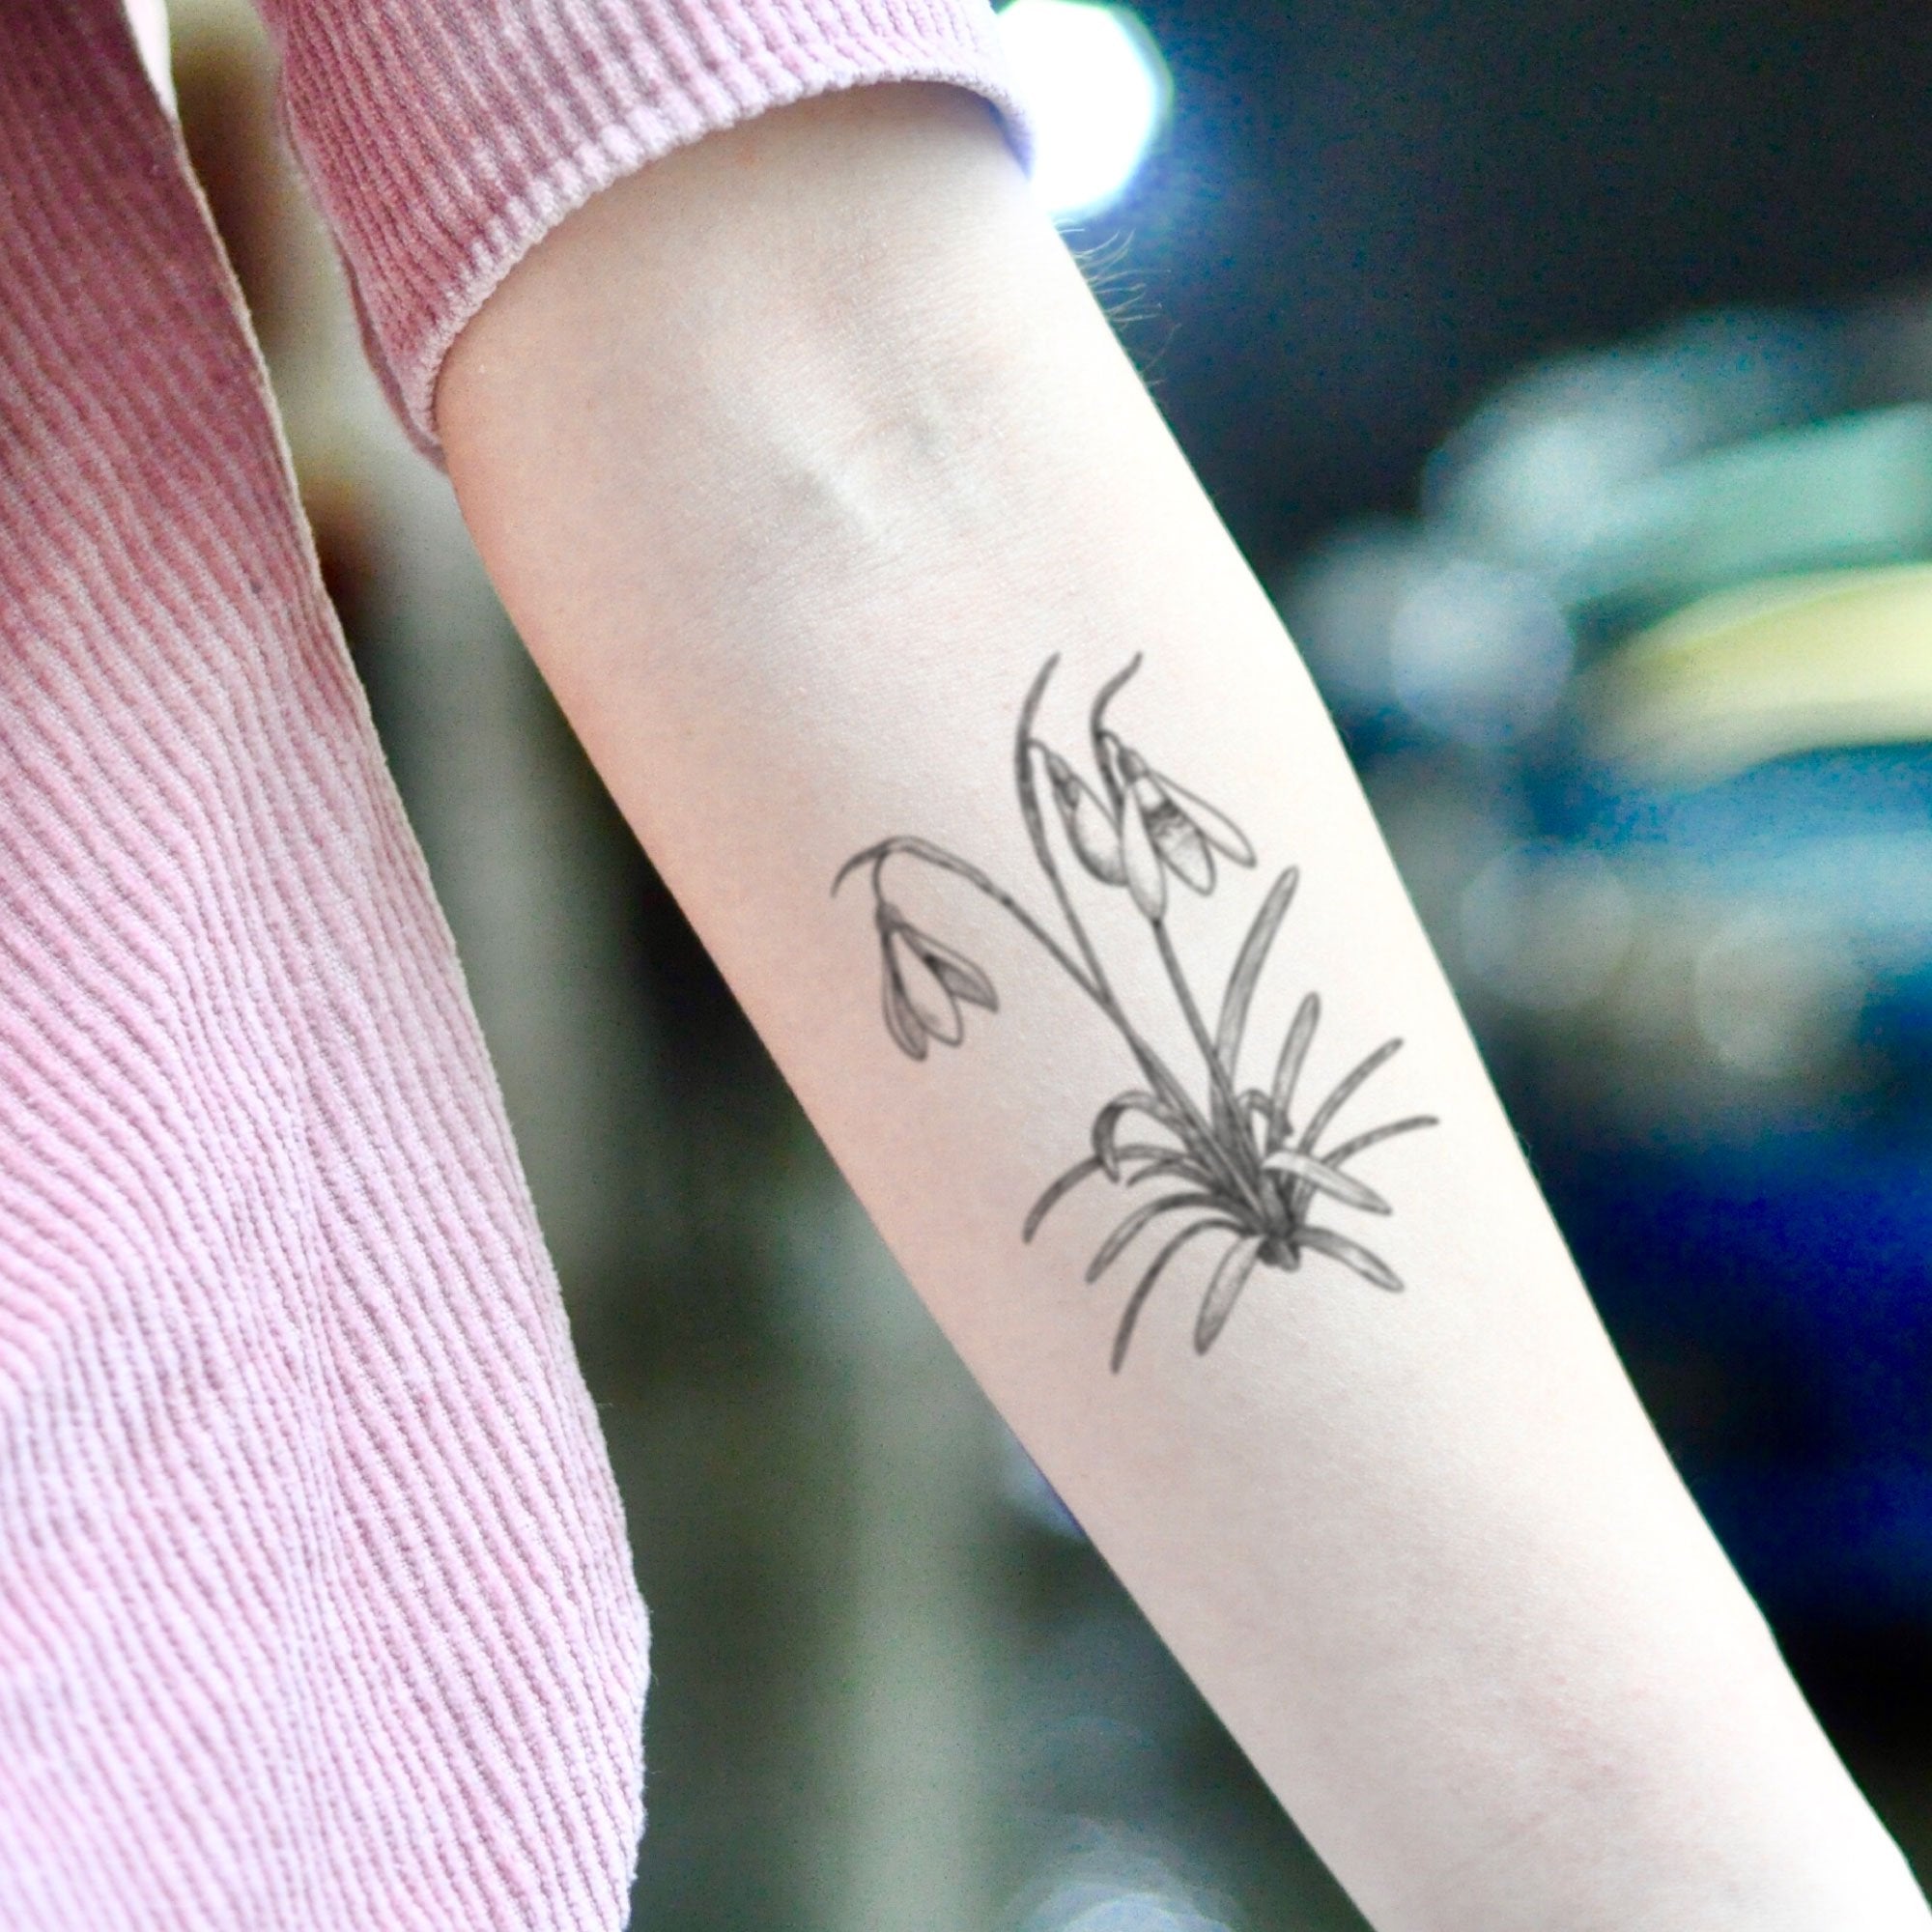 Tattoo tagged with snowdrop flower small tiny ifttt little nature  drag inner forearm illustrative  inkedappcom